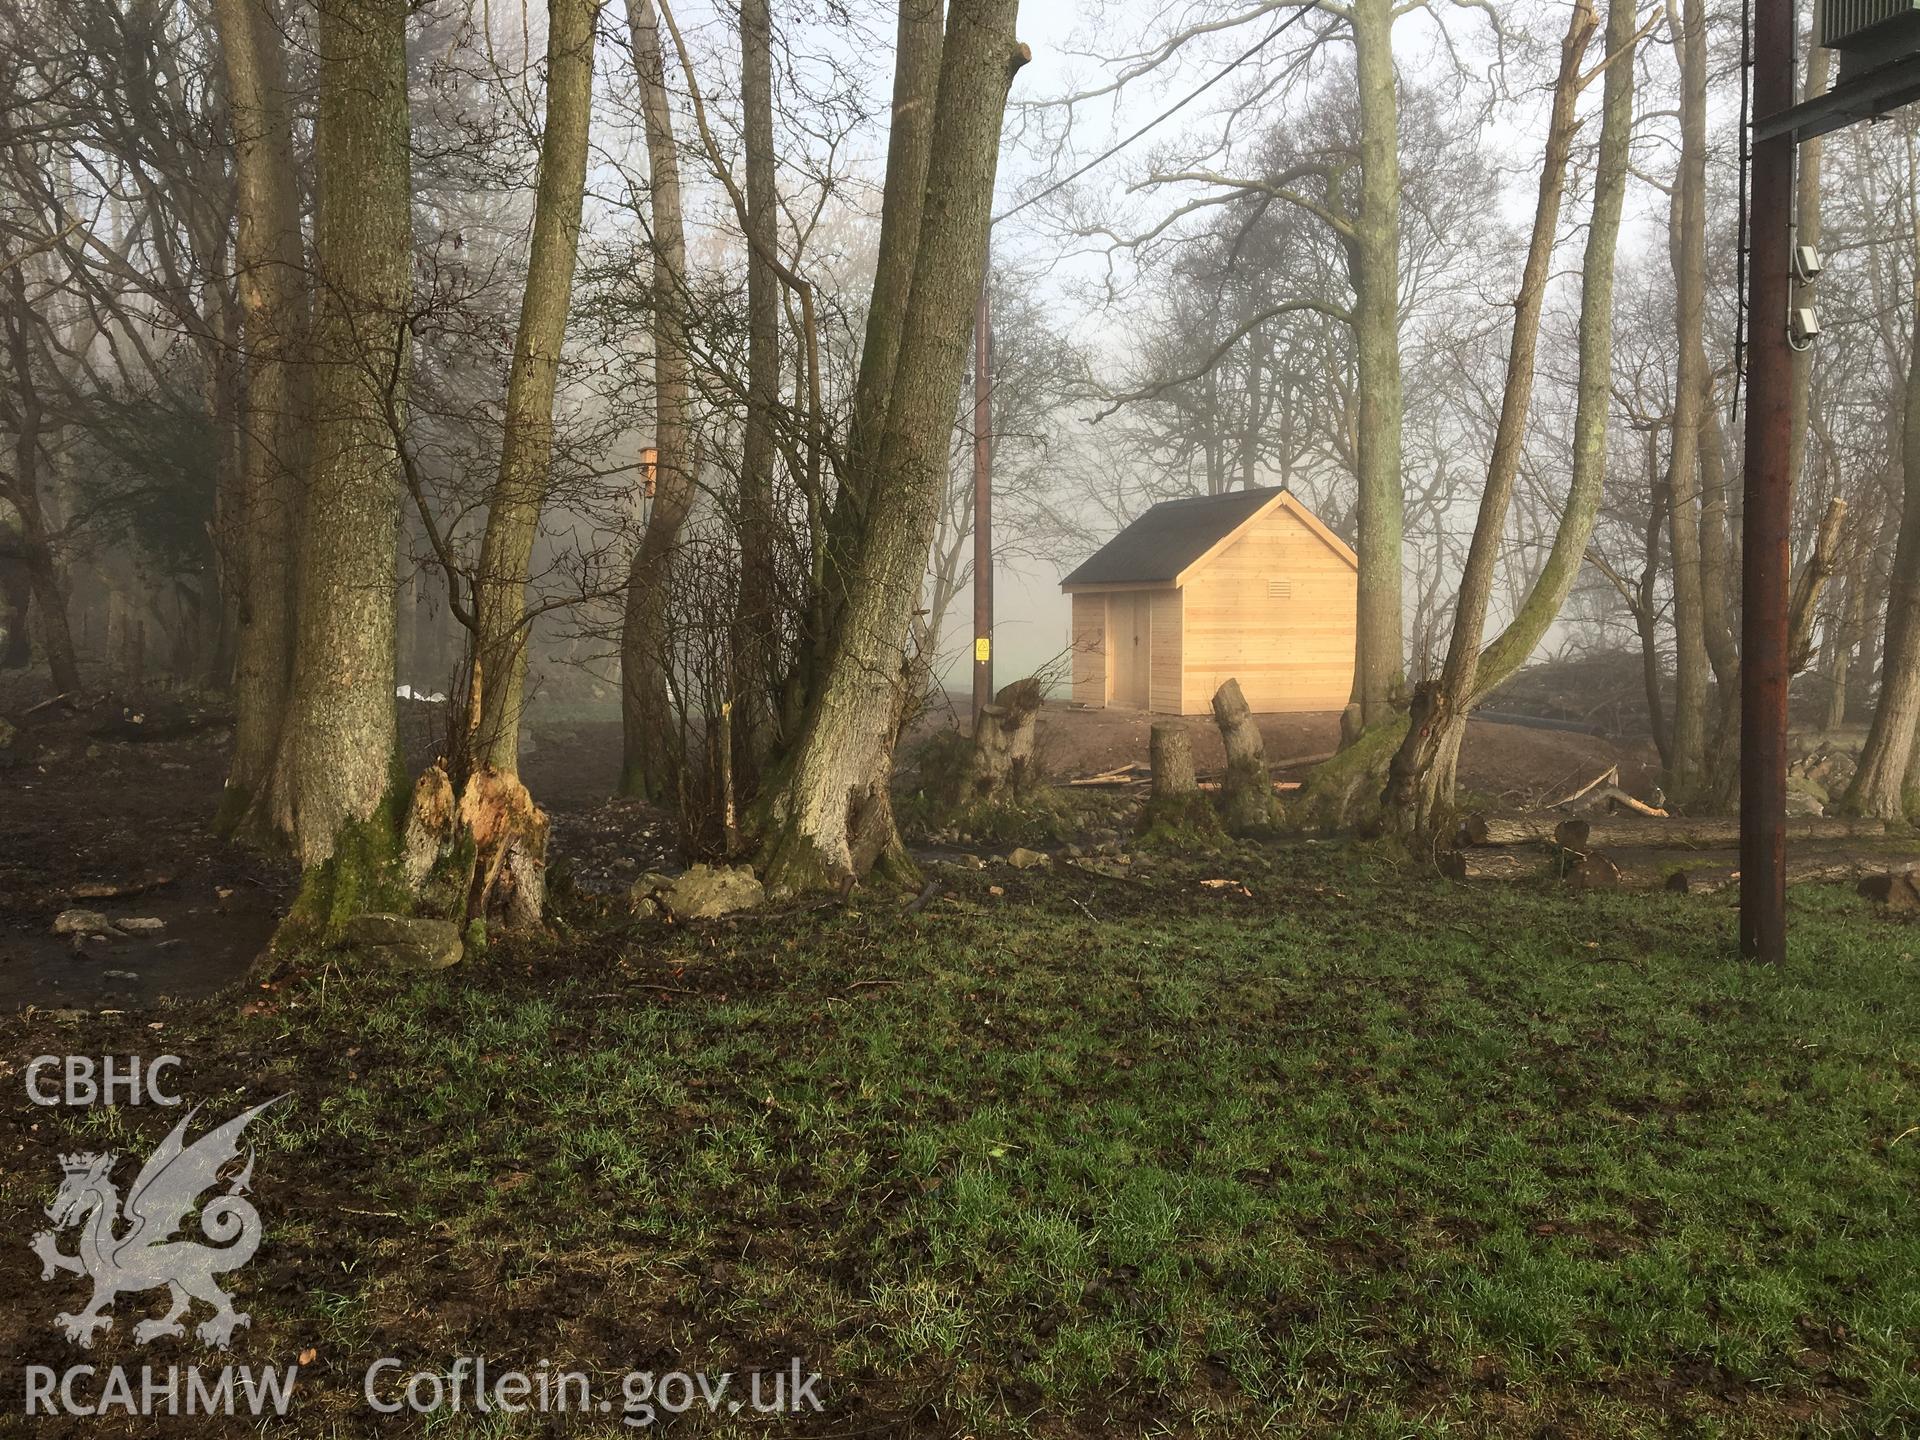 Photo showing the turbine house at Prisk Farm, taken by Trysor,  25/01/2017.